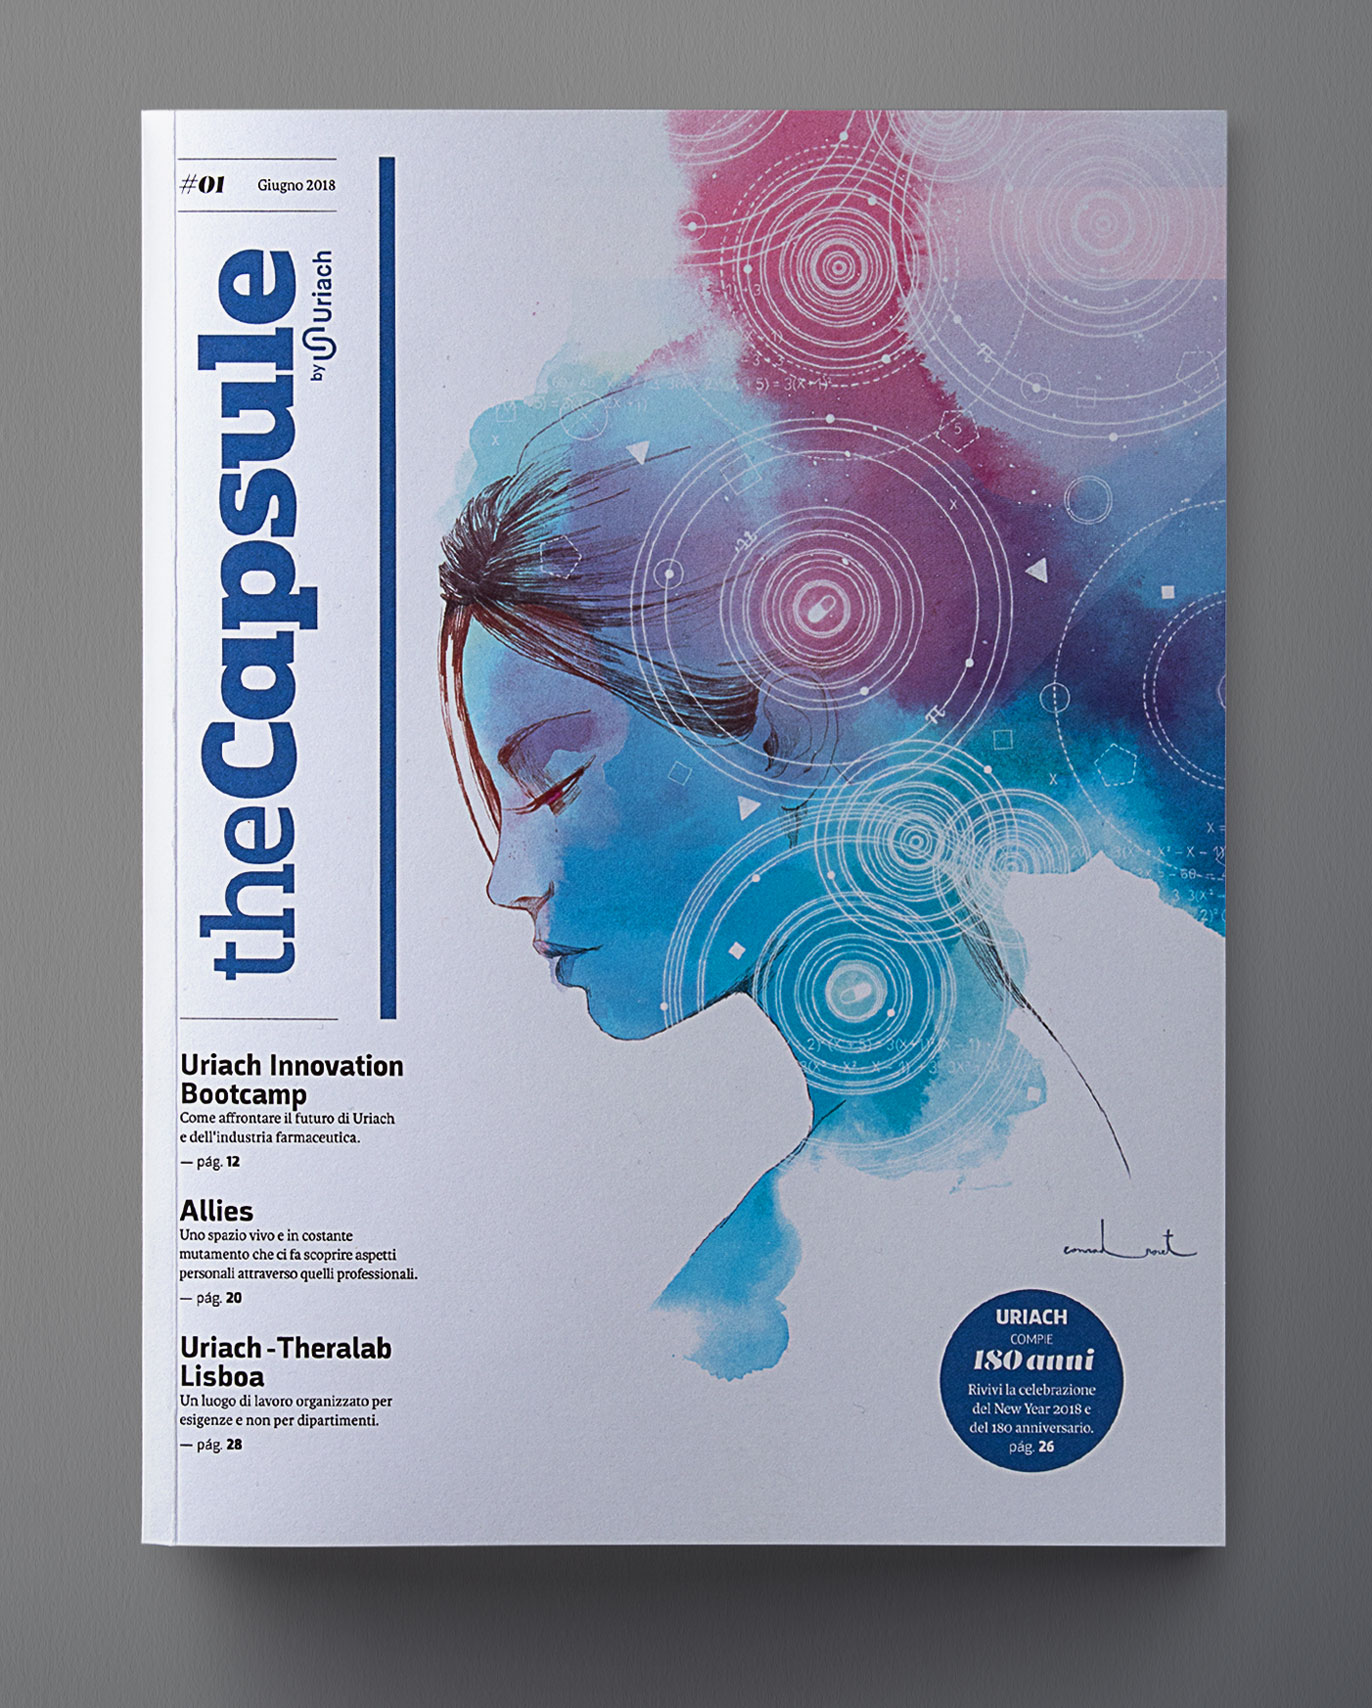 Cover of The Capsule, Uriach Laboratories corporate magazine first issue